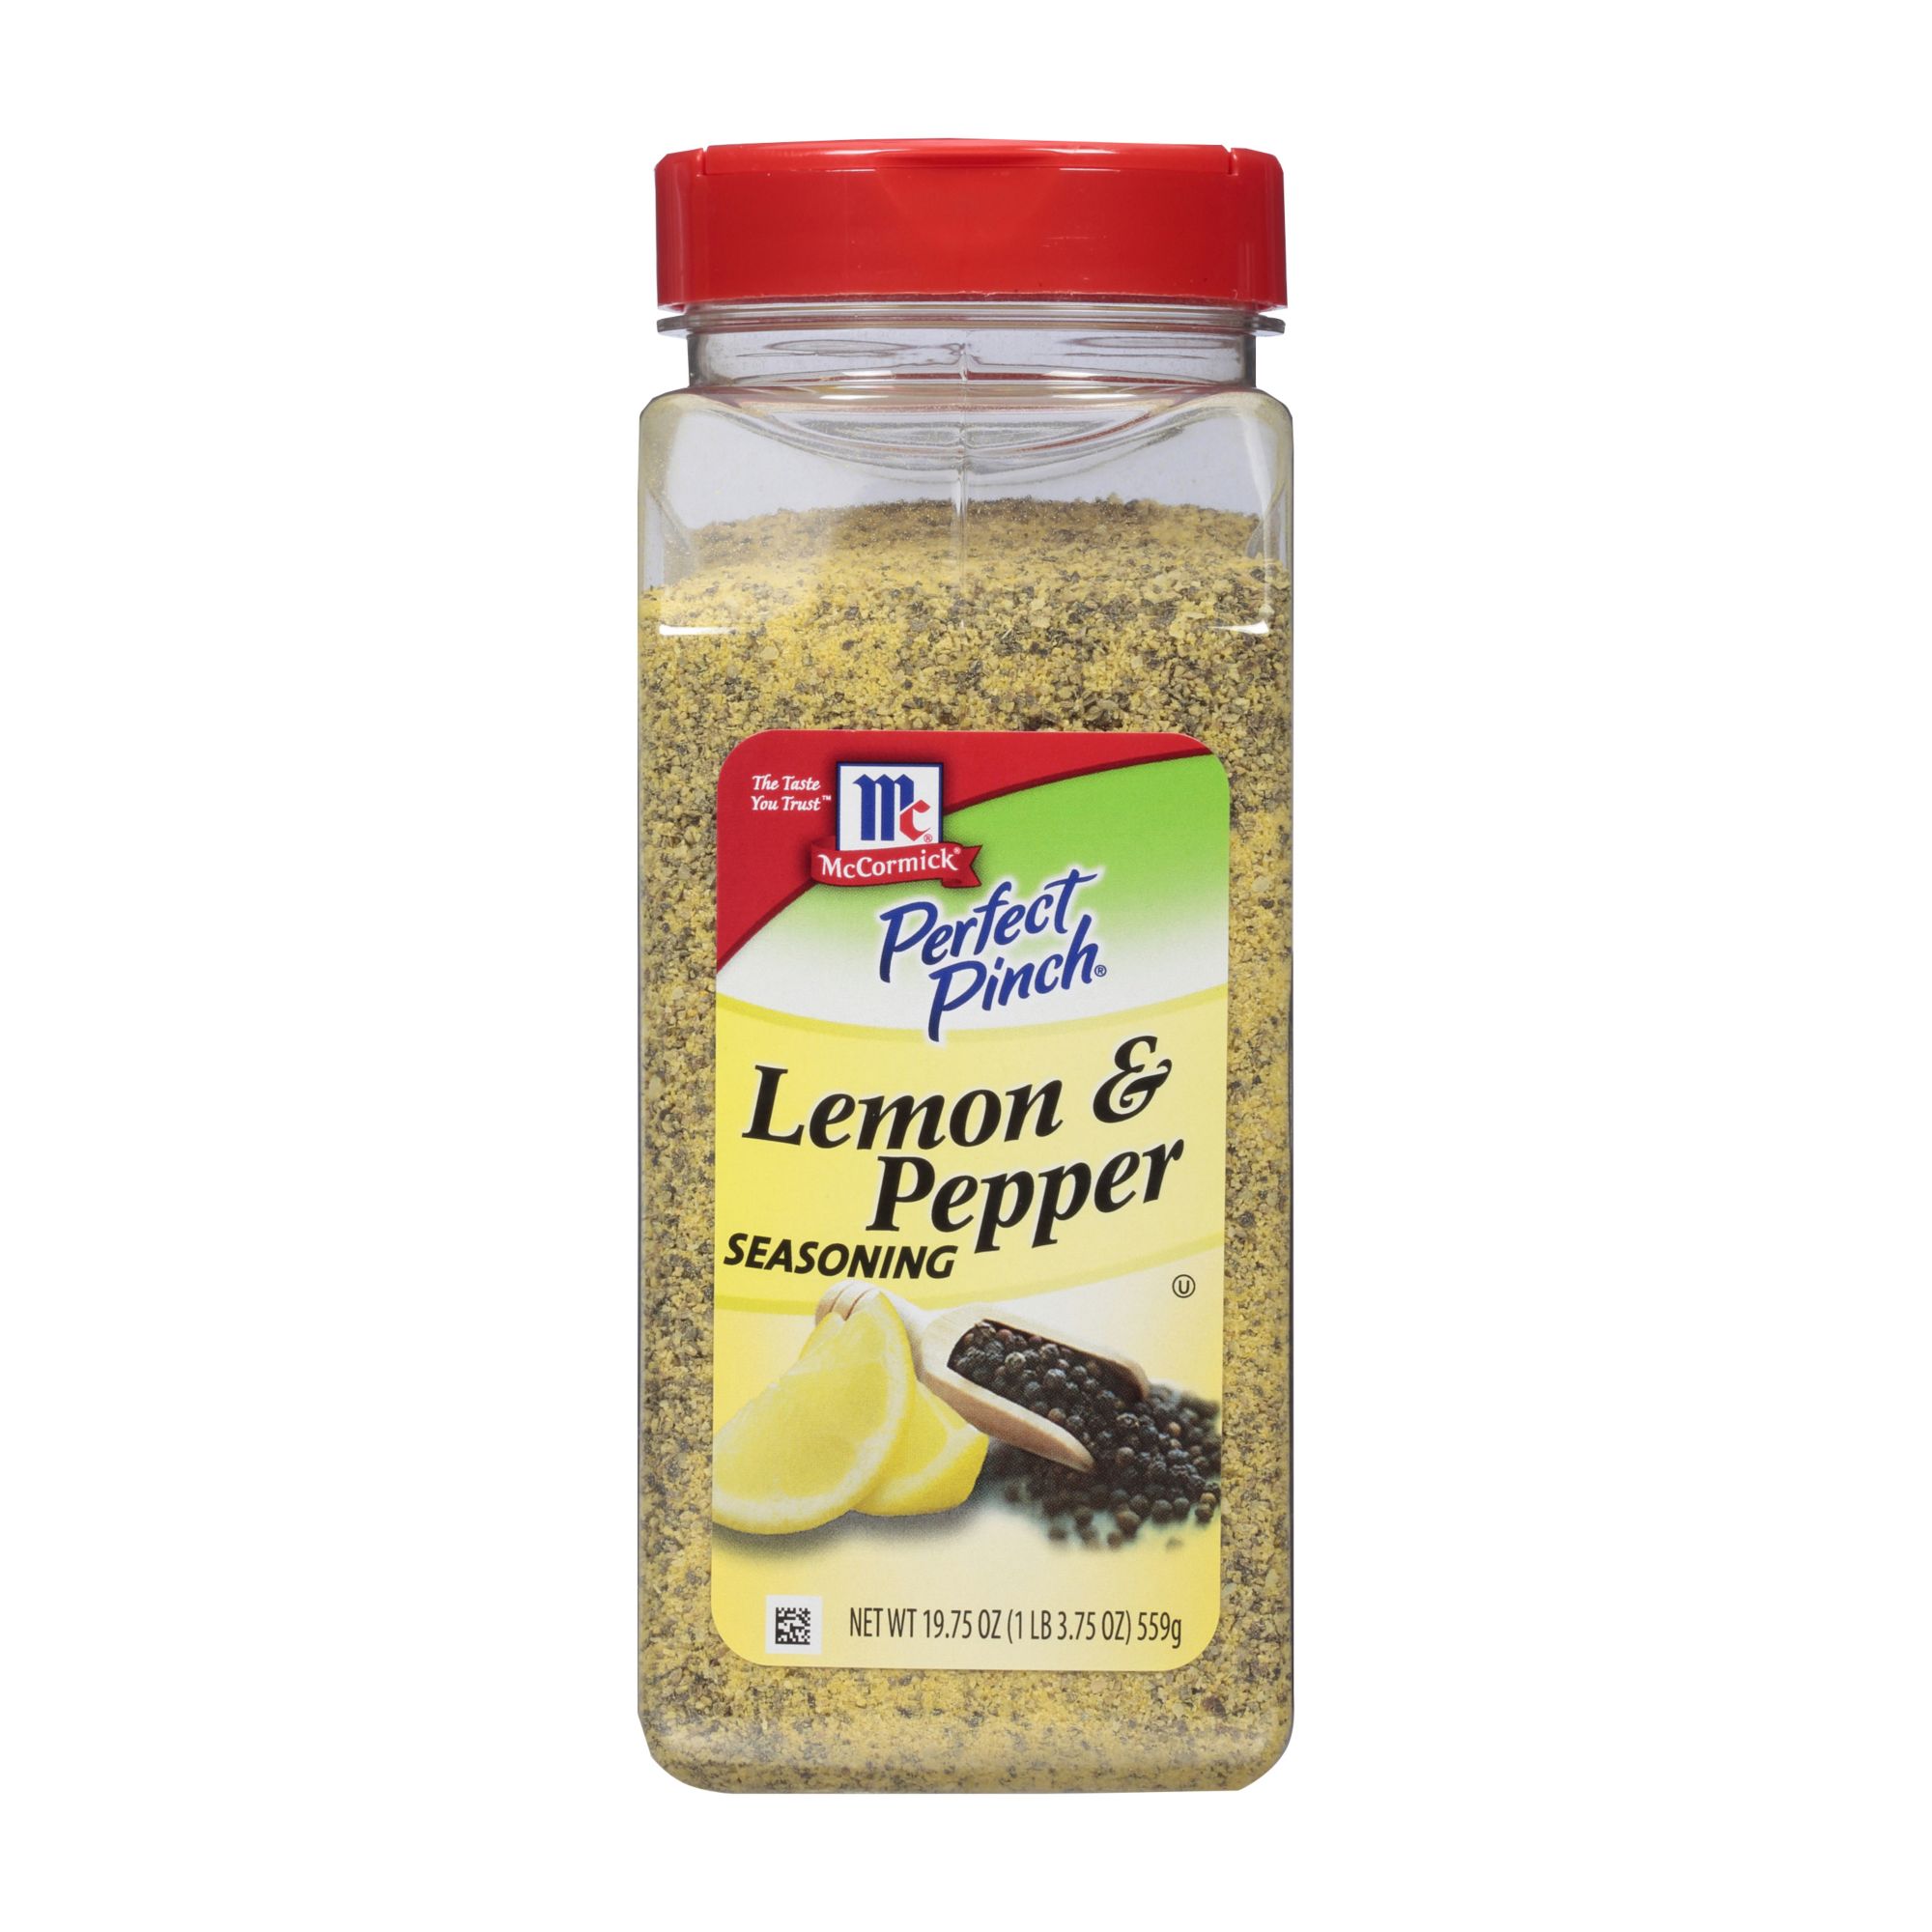 Wow! Seasoning | 3.5 oz. Bottle | Best Multipurpose Seasoning | No MSG |  Savory and Satisfying Flavor | Pack of 4 | Shipping Included